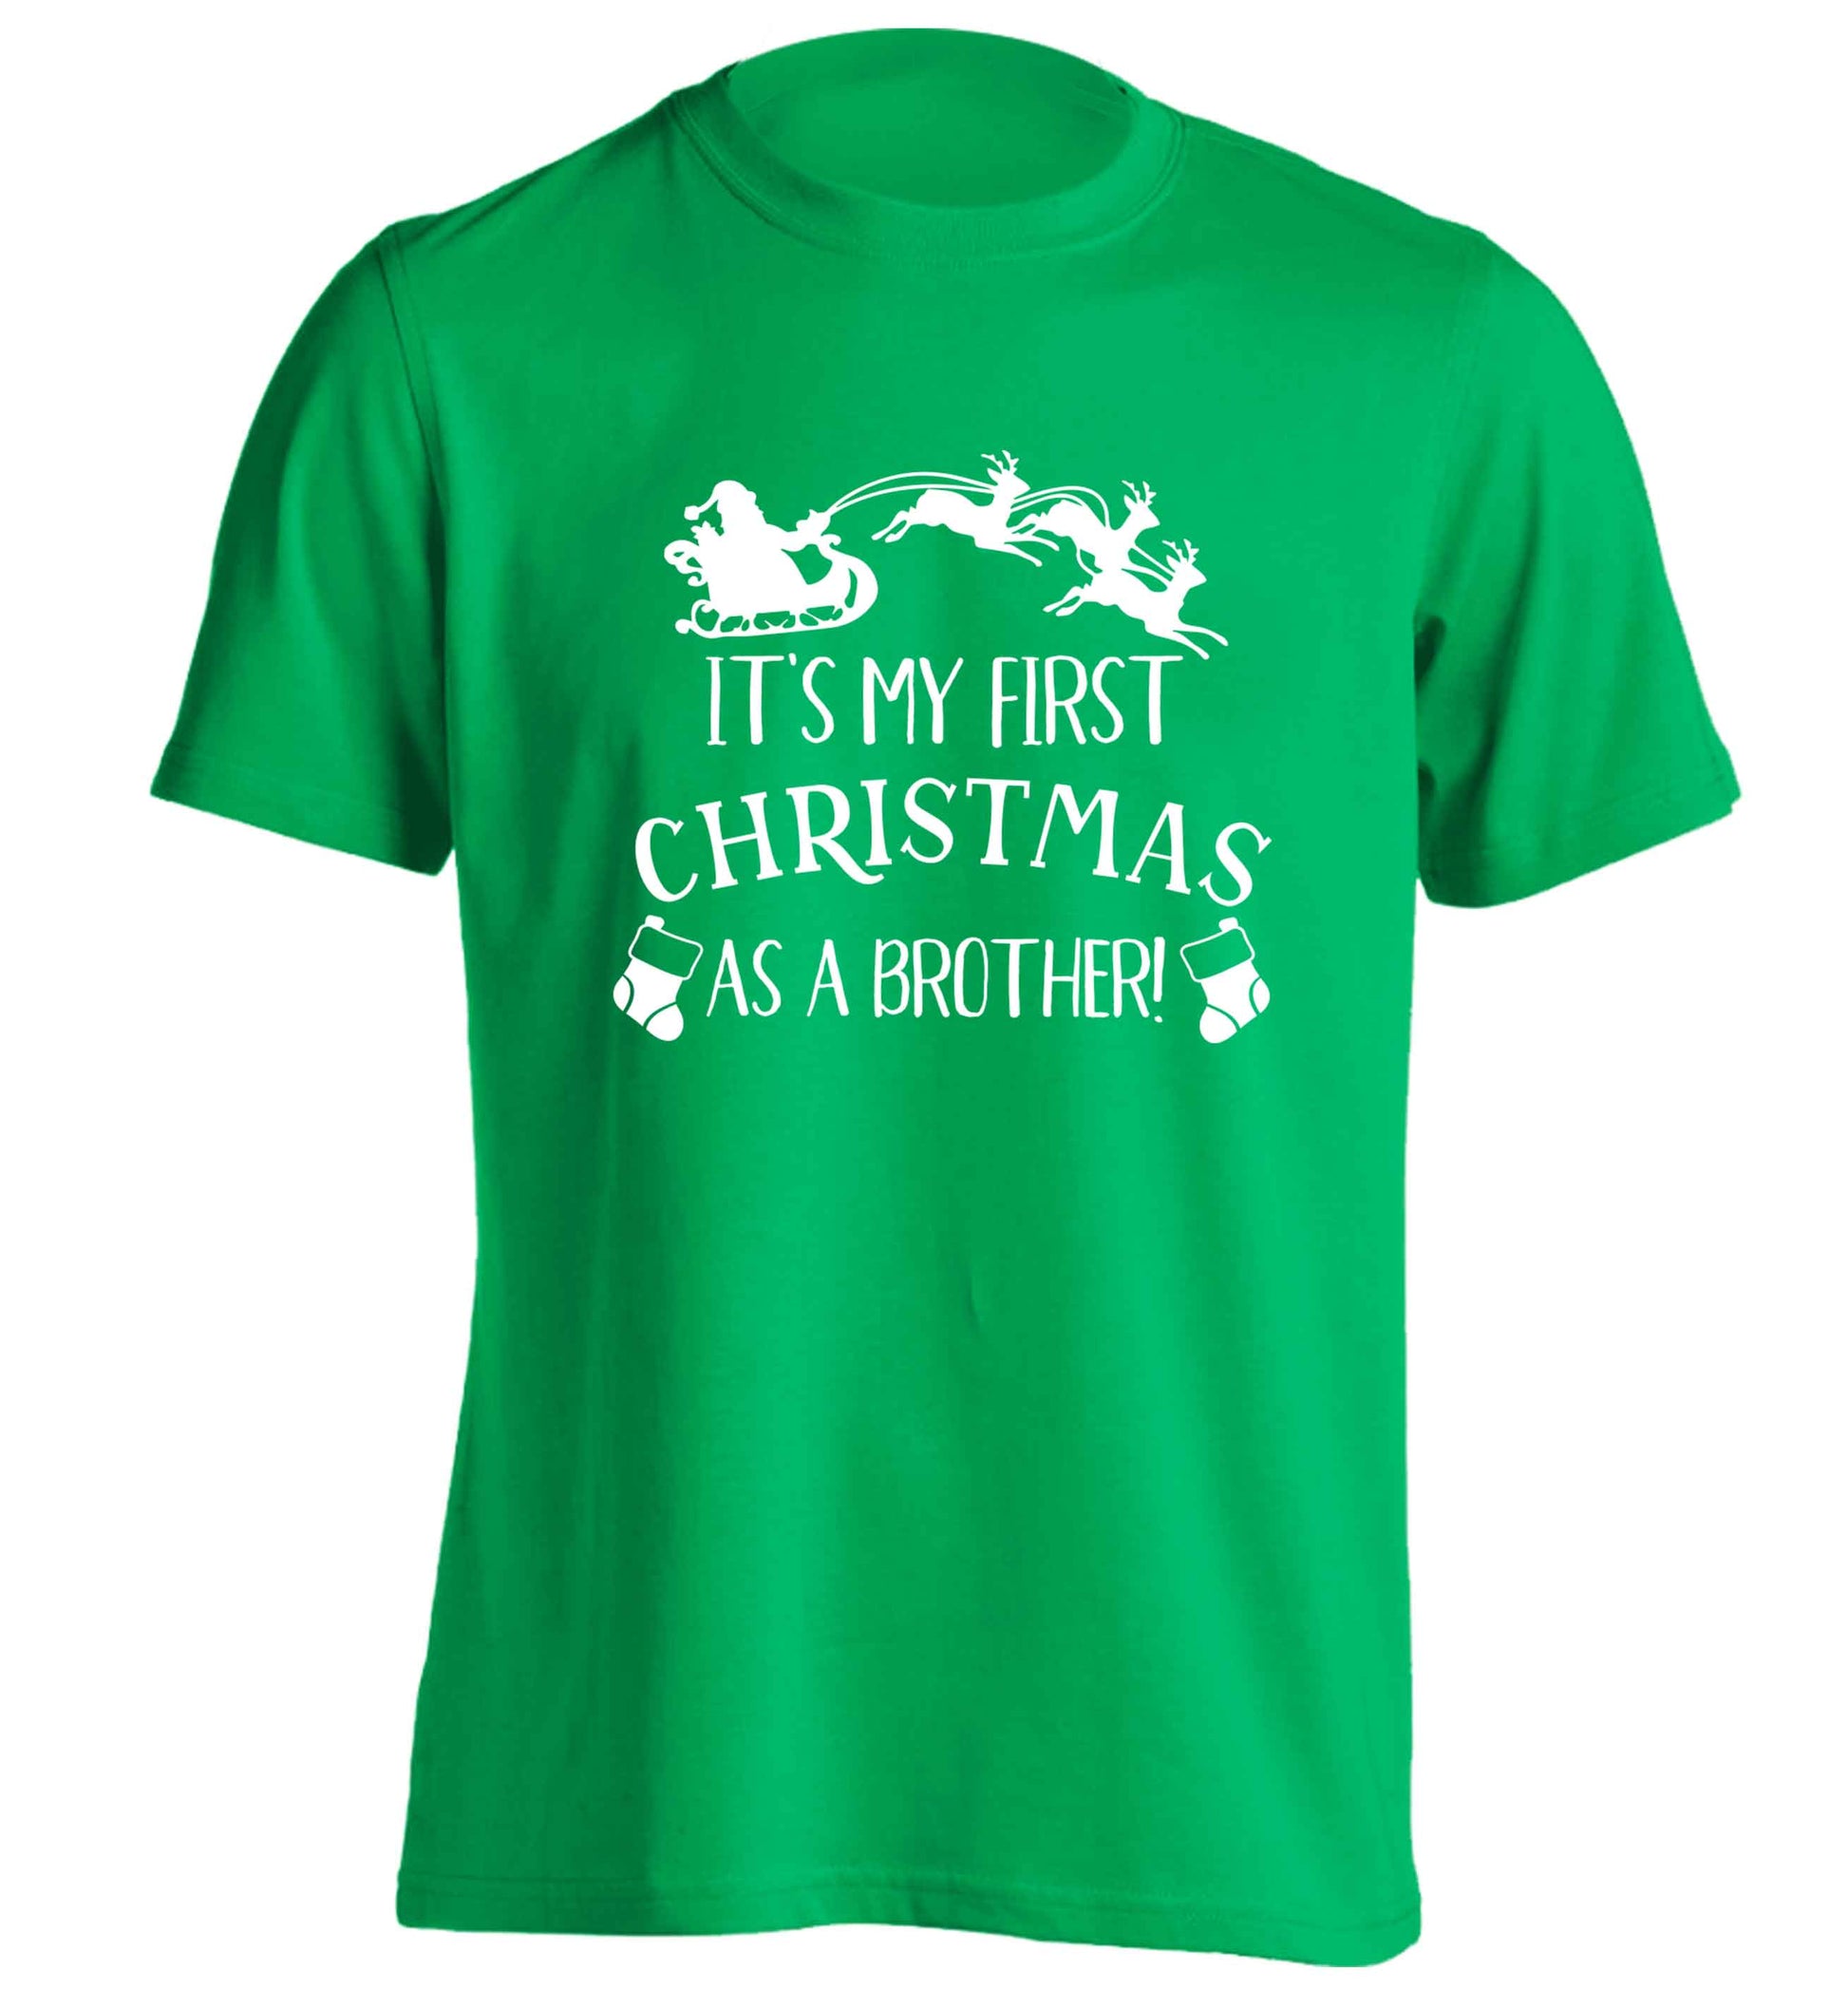 It's my first Christmas as a brother! adults unisex green Tshirt 2XL